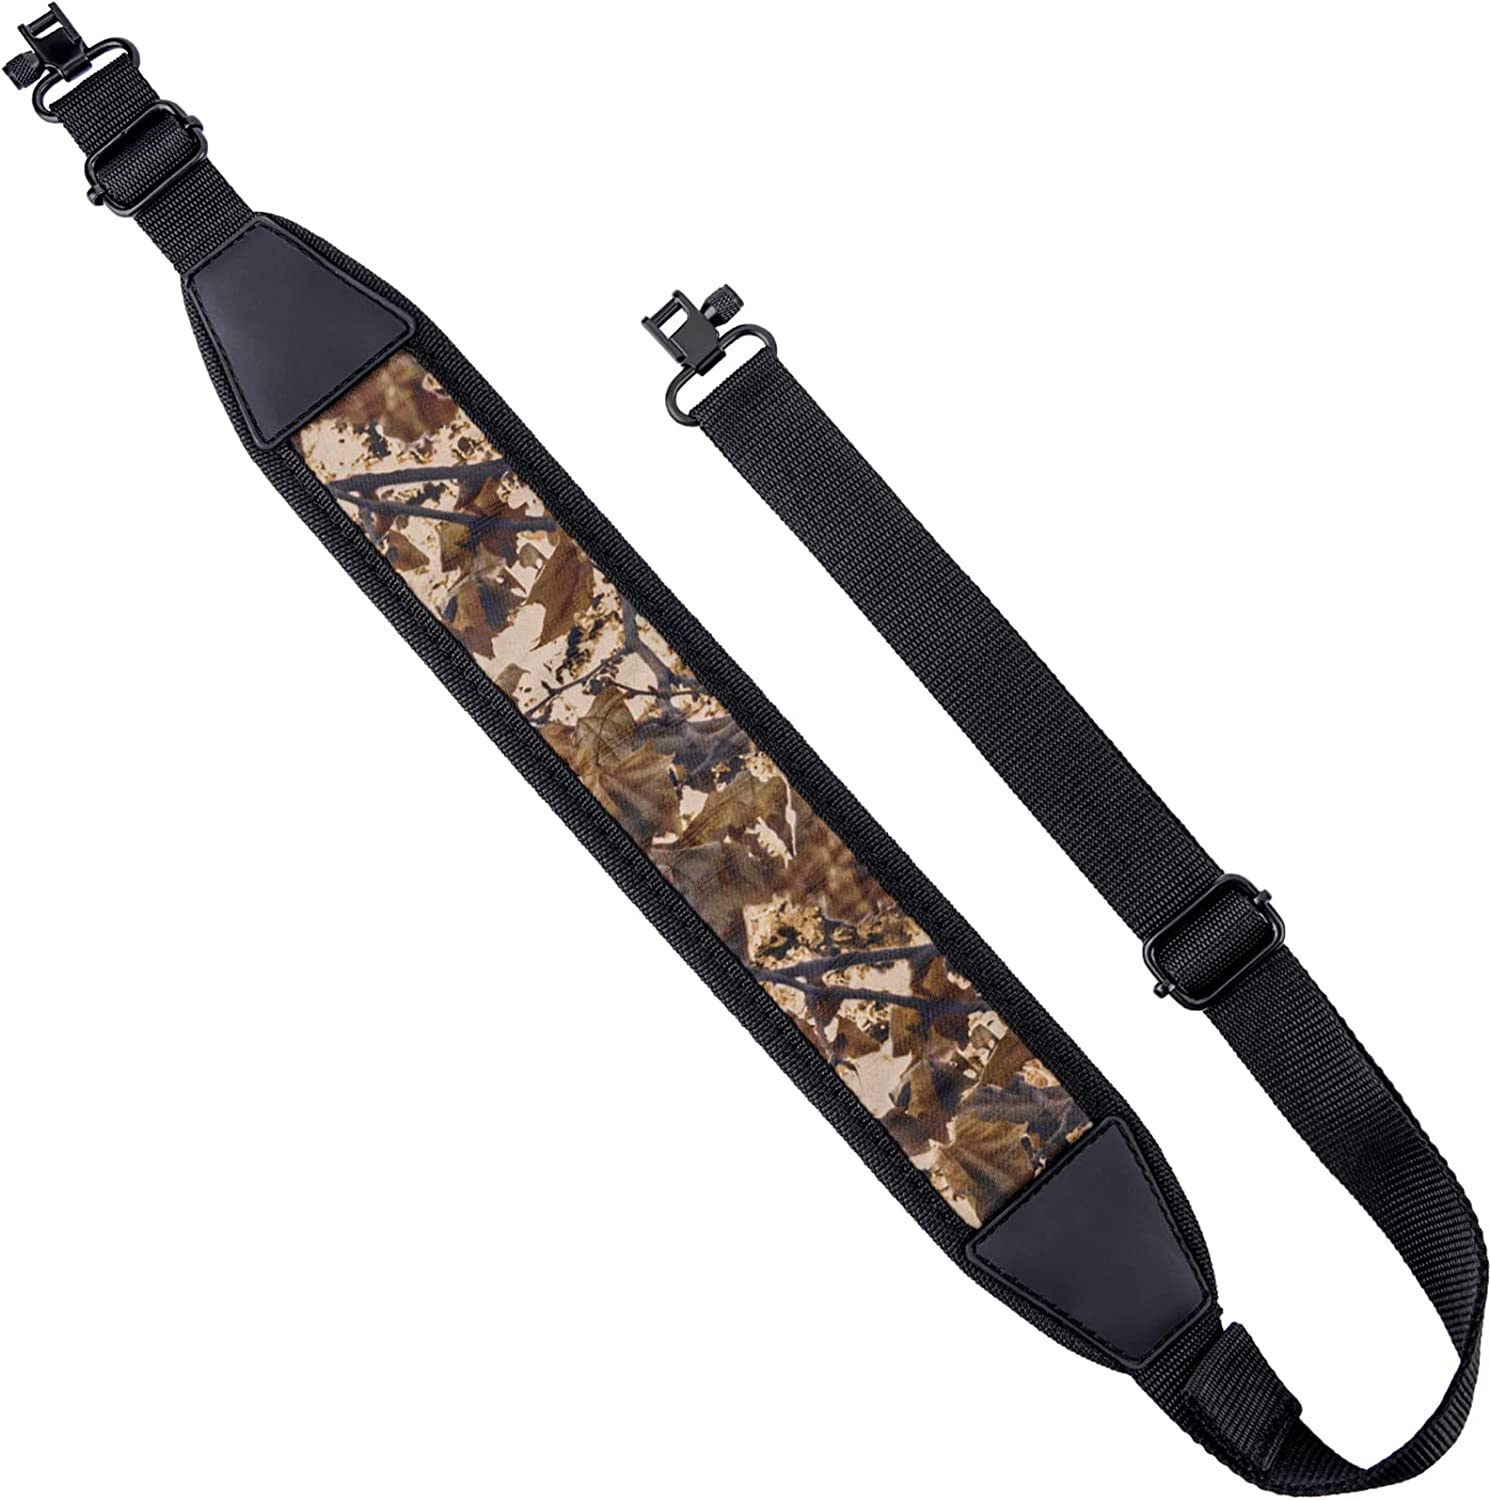 Gun Sling 2 Point Rifle Sling with Swivels, Comfortable Neoprene Padded Hunting Rifle Sling, Length Adjustable Rifle Shoulder Strap for Outdoors